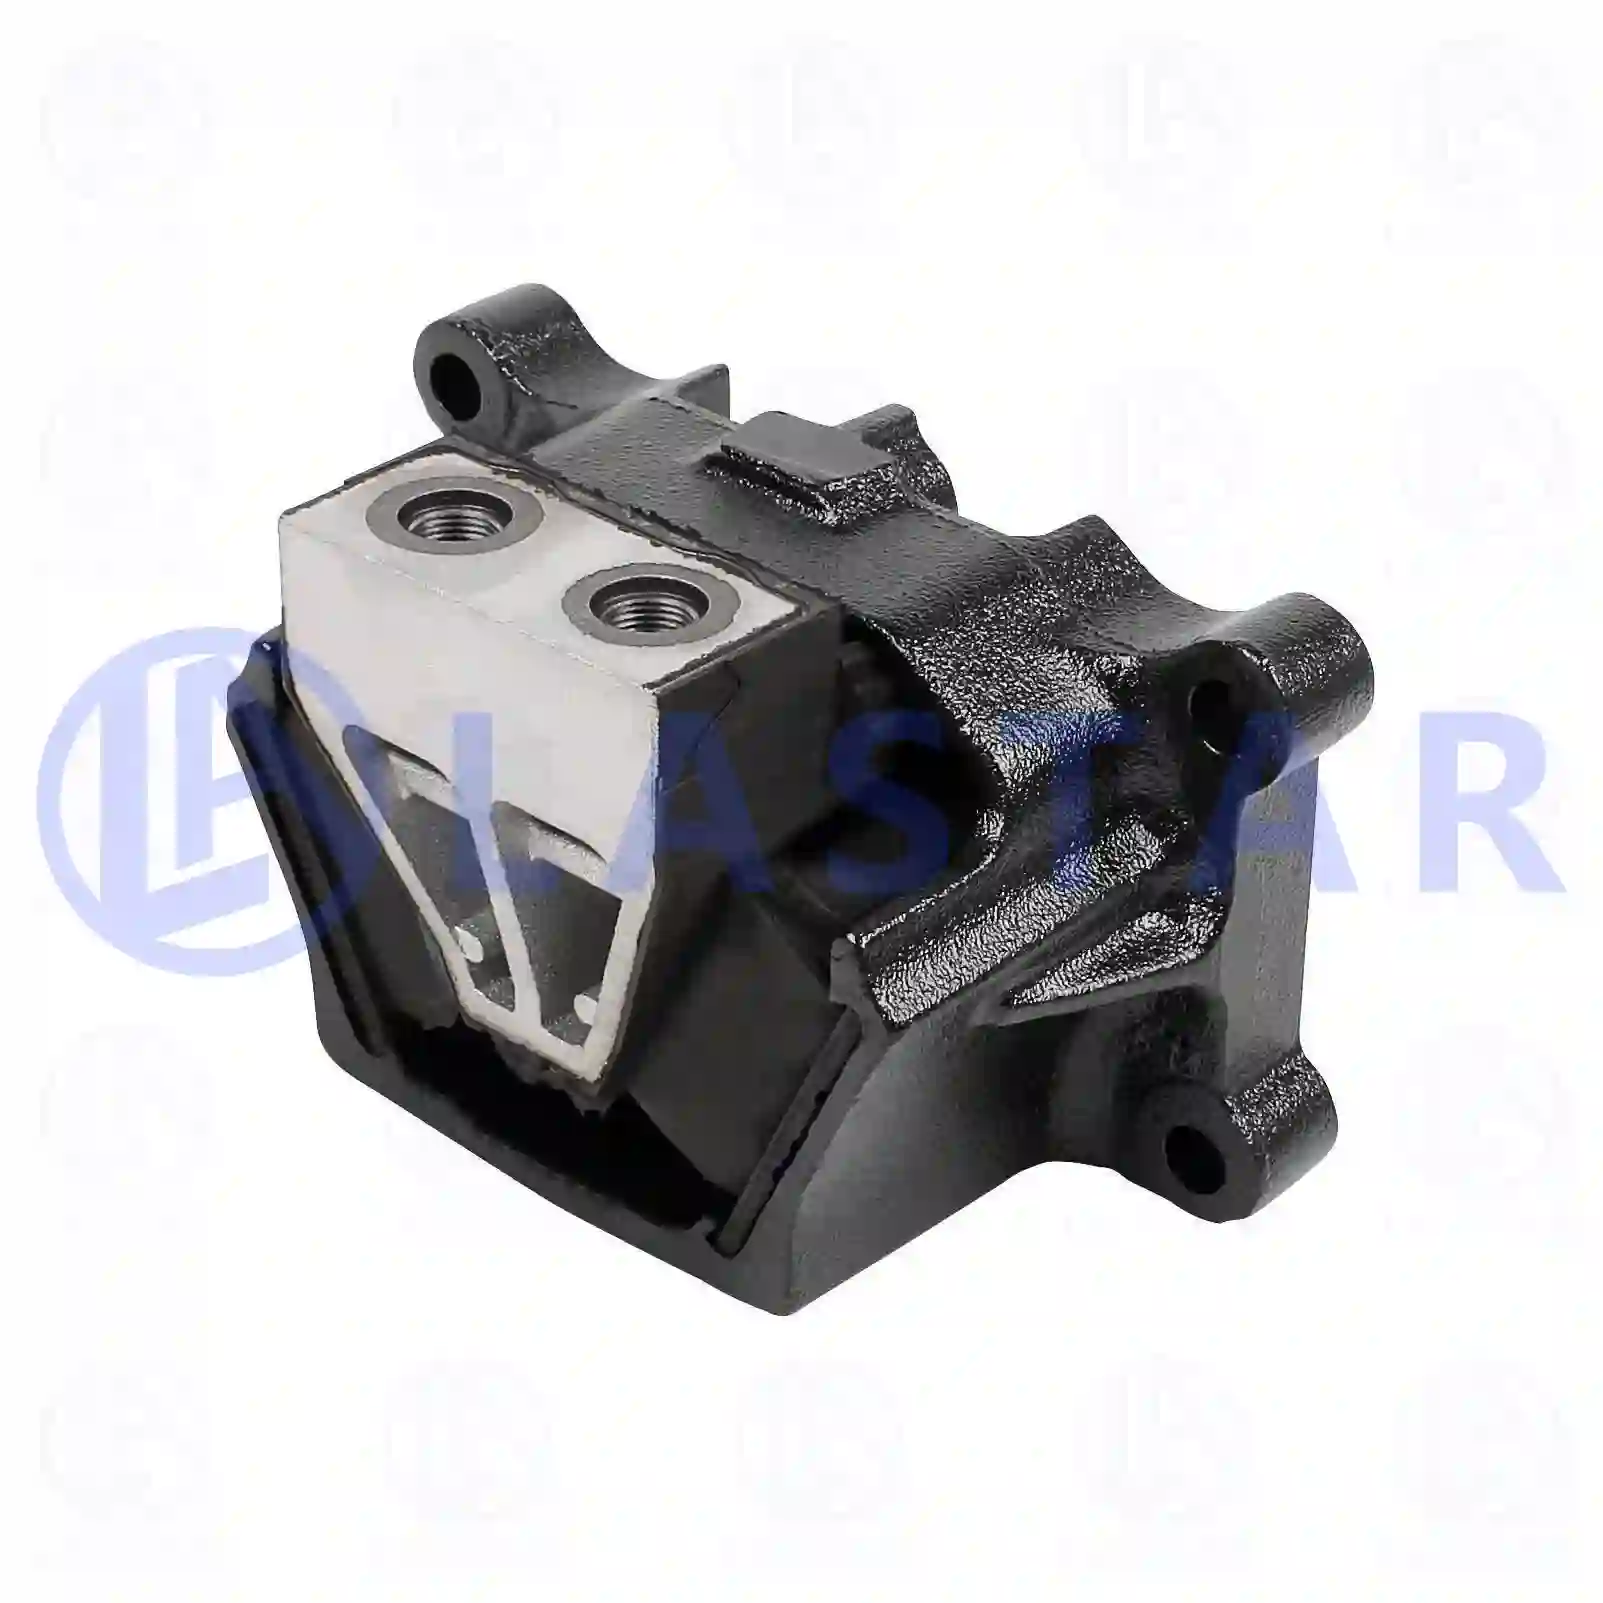 Engine mounting, 77702420, 9412418513, , , , ||  77702420 Lastar Spare Part | Truck Spare Parts, Auotomotive Spare Parts Engine mounting, 77702420, 9412418513, , , , ||  77702420 Lastar Spare Part | Truck Spare Parts, Auotomotive Spare Parts